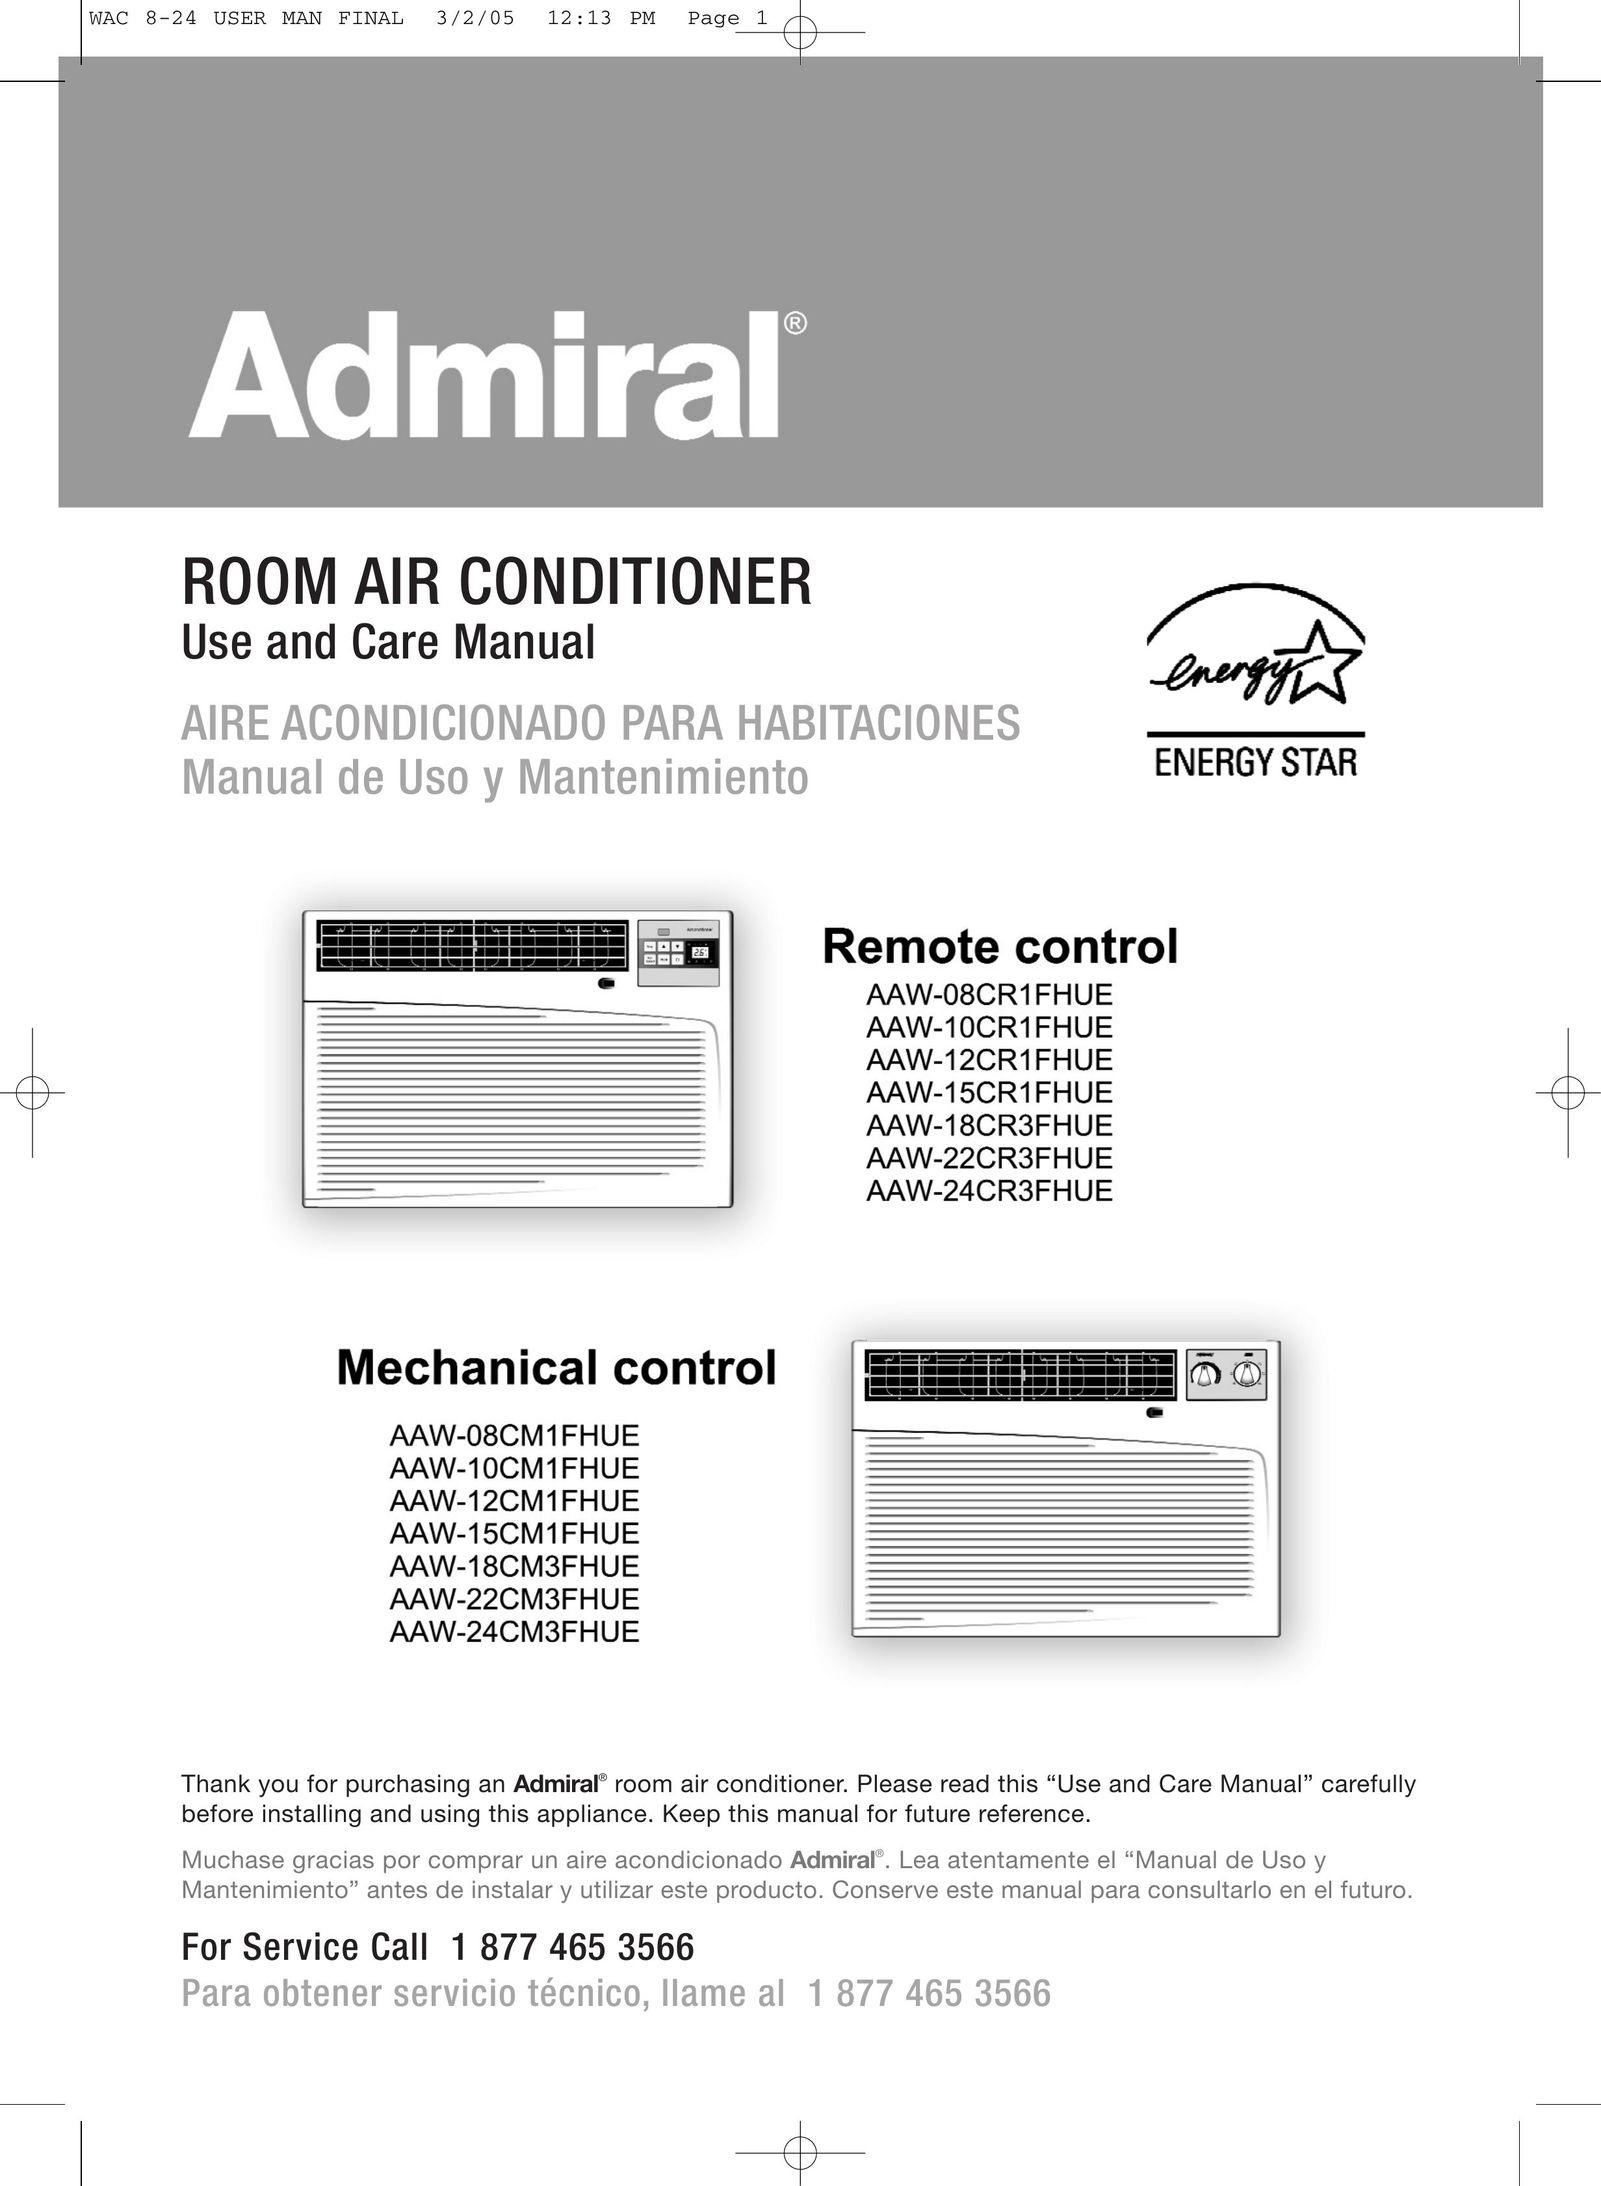 Admiral AAW-08CM1FHUE Air Conditioner User Manual